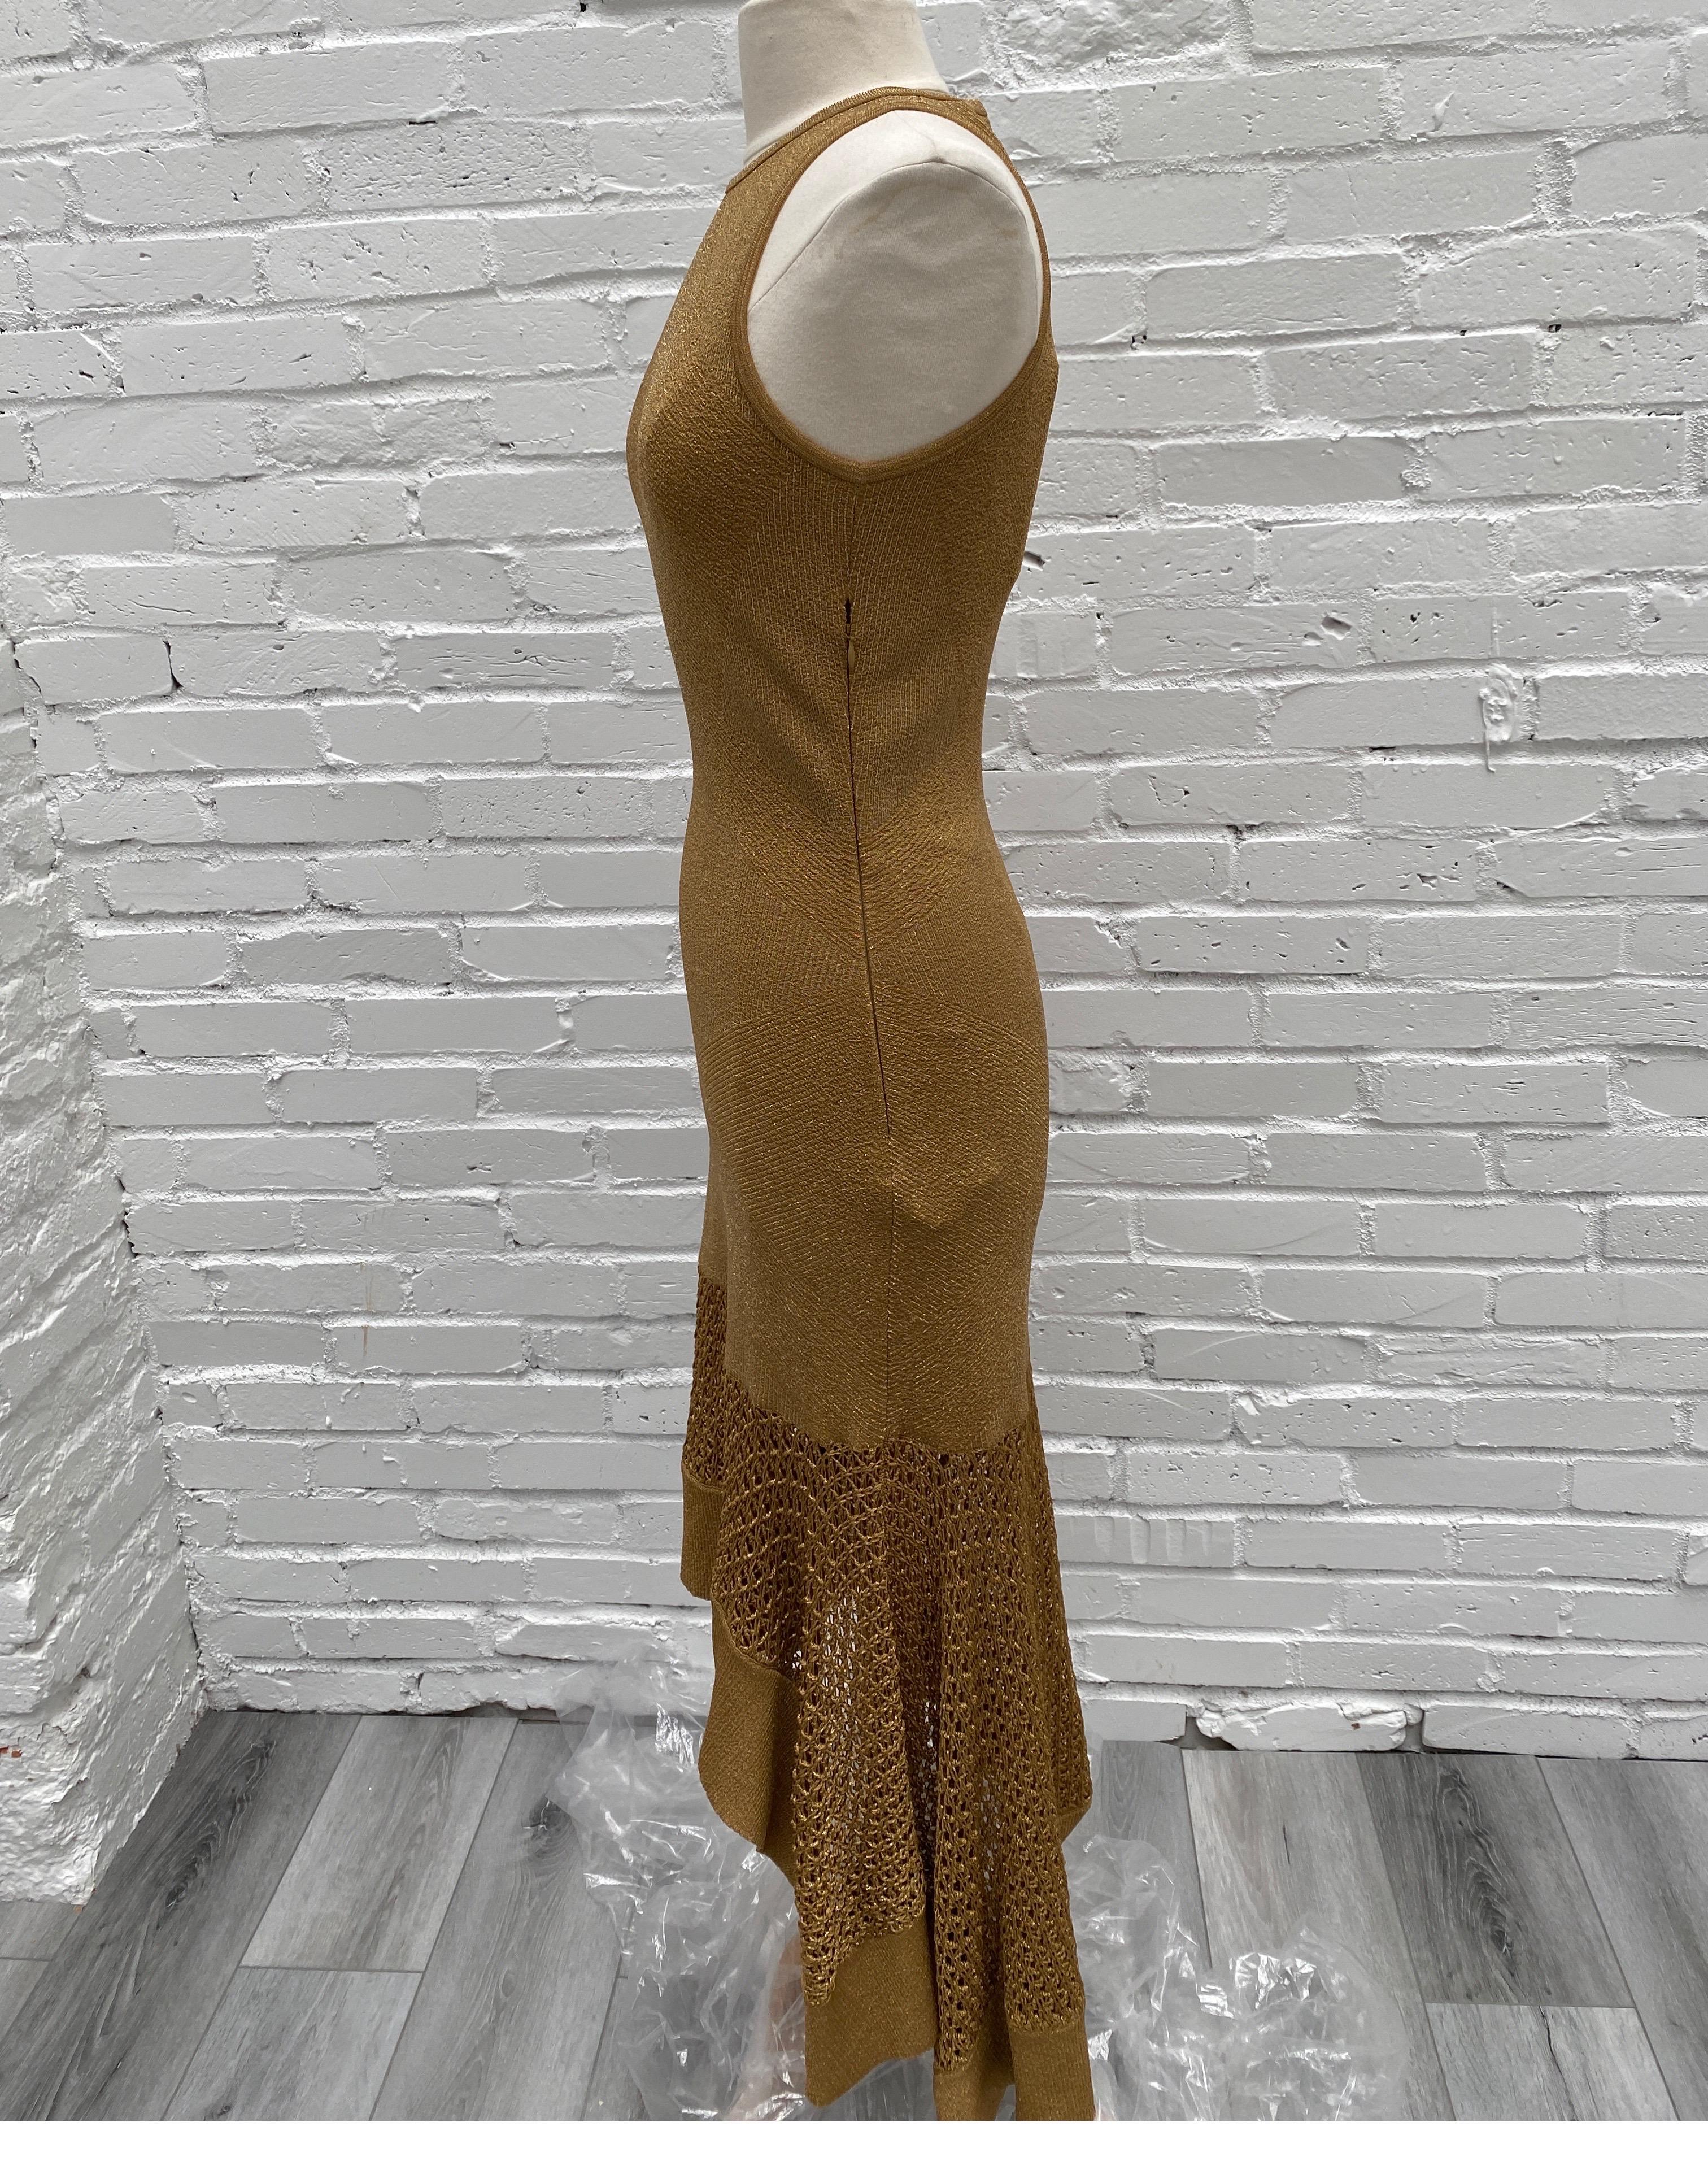 Alexander McQueen Gold Knit Evening Dress. Stunning long dress. Size 0-4. Has stretch so can be worn by a 6 even. Flattering cut. New with tags. Own an iconic designer piece. Guaranteed authentic. 